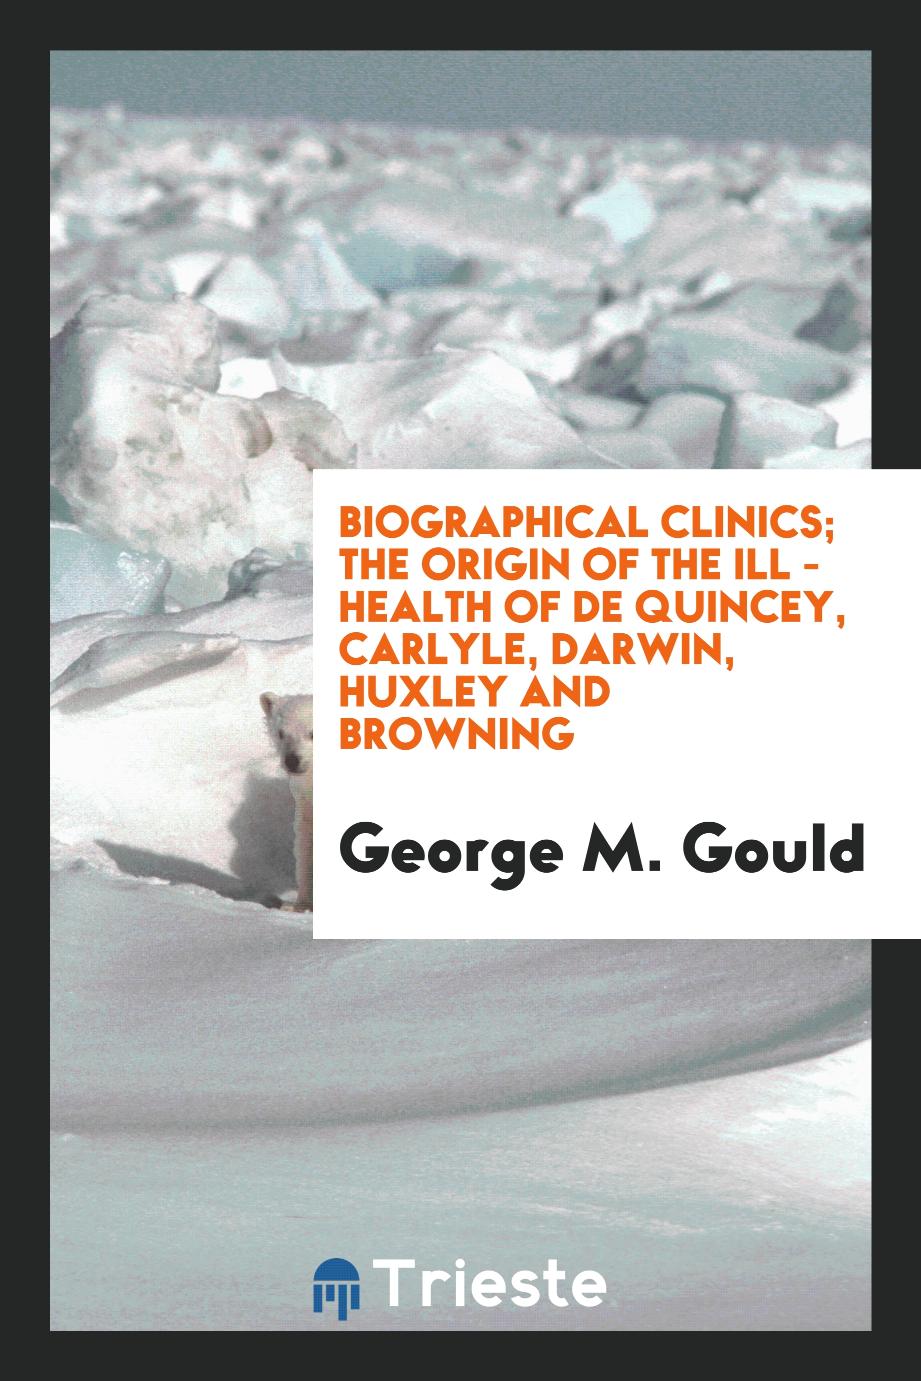 Biographical clinics; The origin of the Ill - Health of De Quincey, Carlyle, Darwin, Huxley and Browning